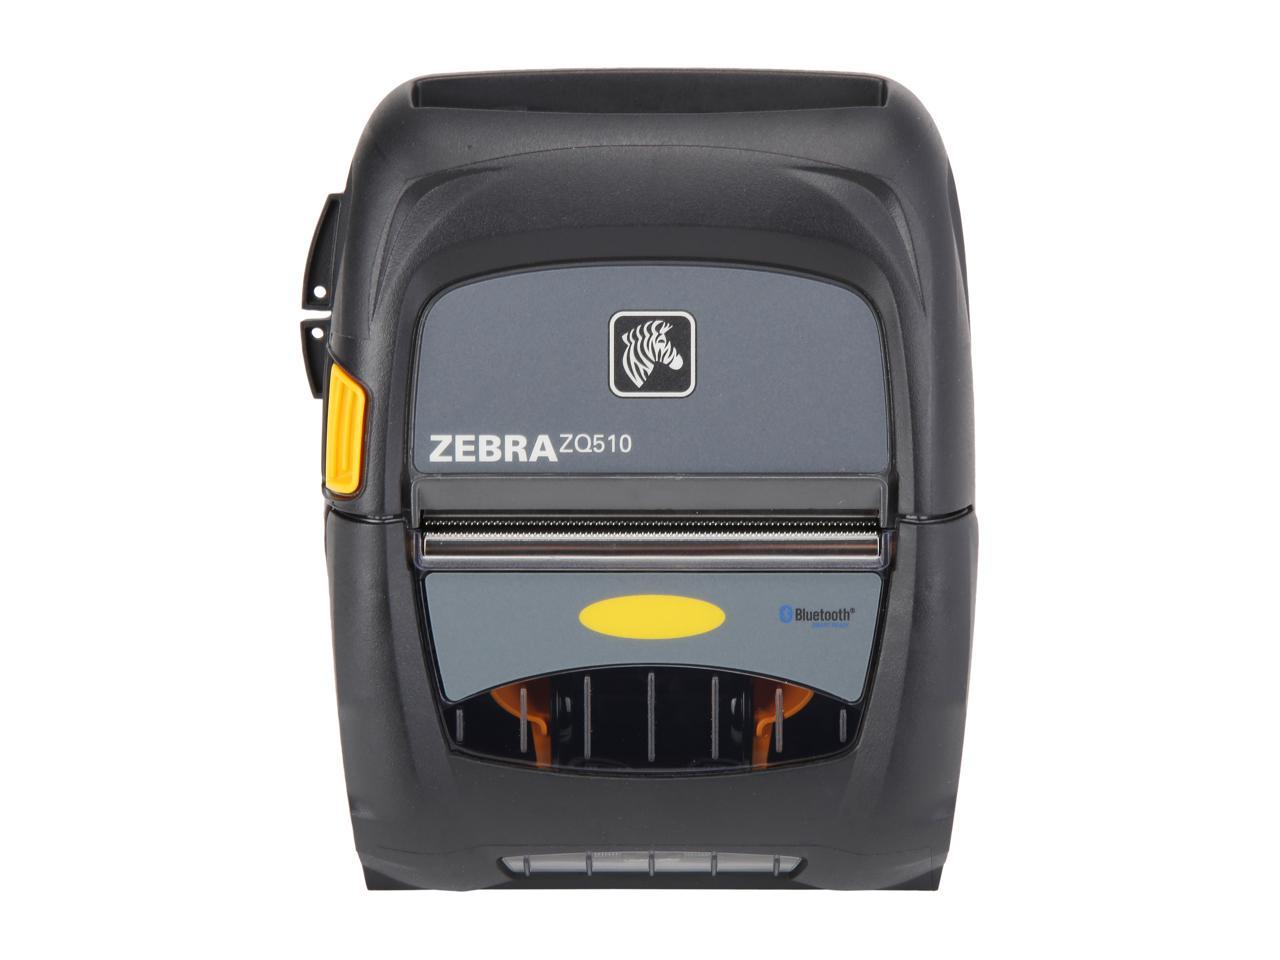 Zebra Zq510 3 Mobile Direct Thermal Receipt And Label Printer 203 Dpi Bluetooth 40 Linered 0815